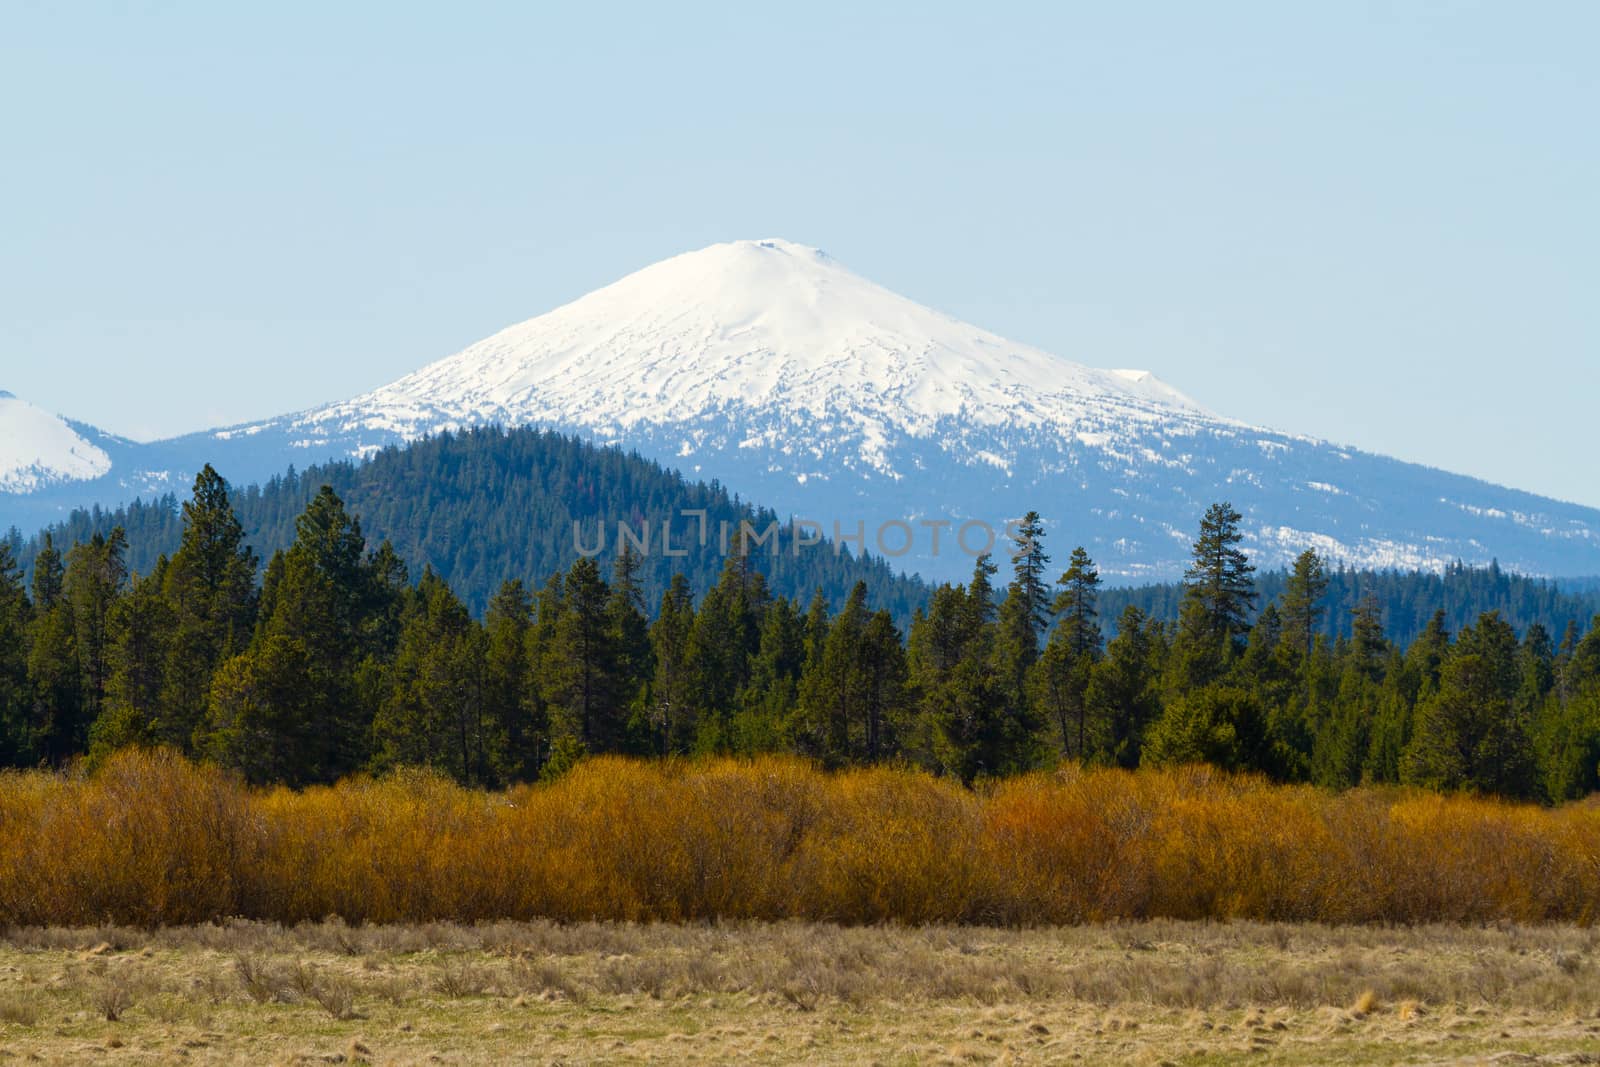 Mount Bachelor in Oregon is photographed from a distance to create this nature scenic landscape of the snow-capped mountain.